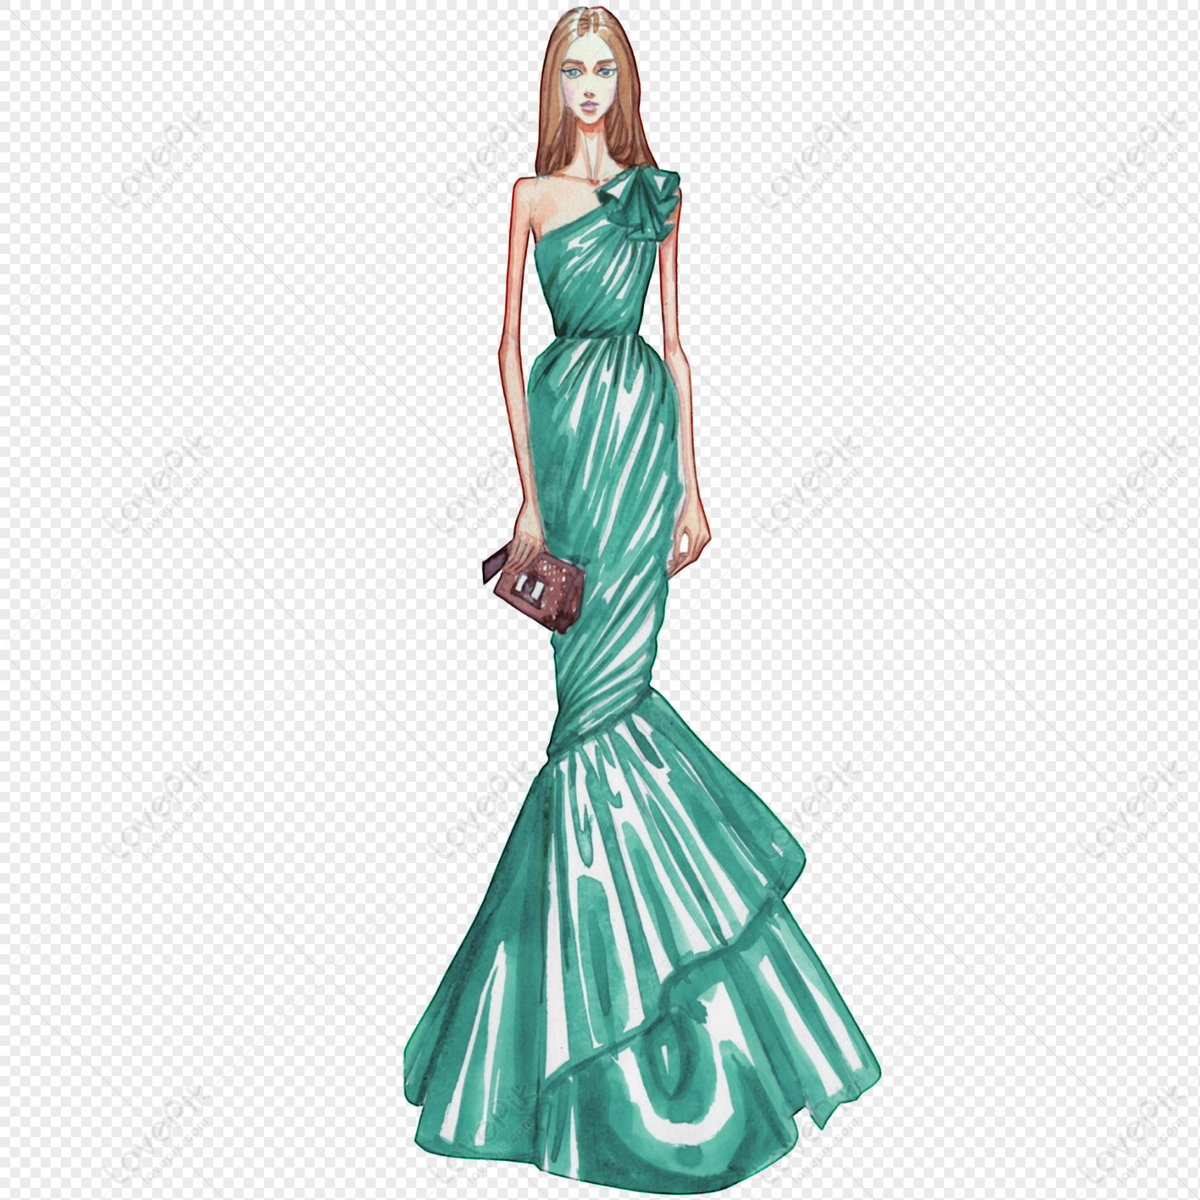 Woman in black dress holding red bag illustration, Fashion illustration  Drawing Illustrator Sketch, Paris, fashion, world, fashion Model png |  PNGWing